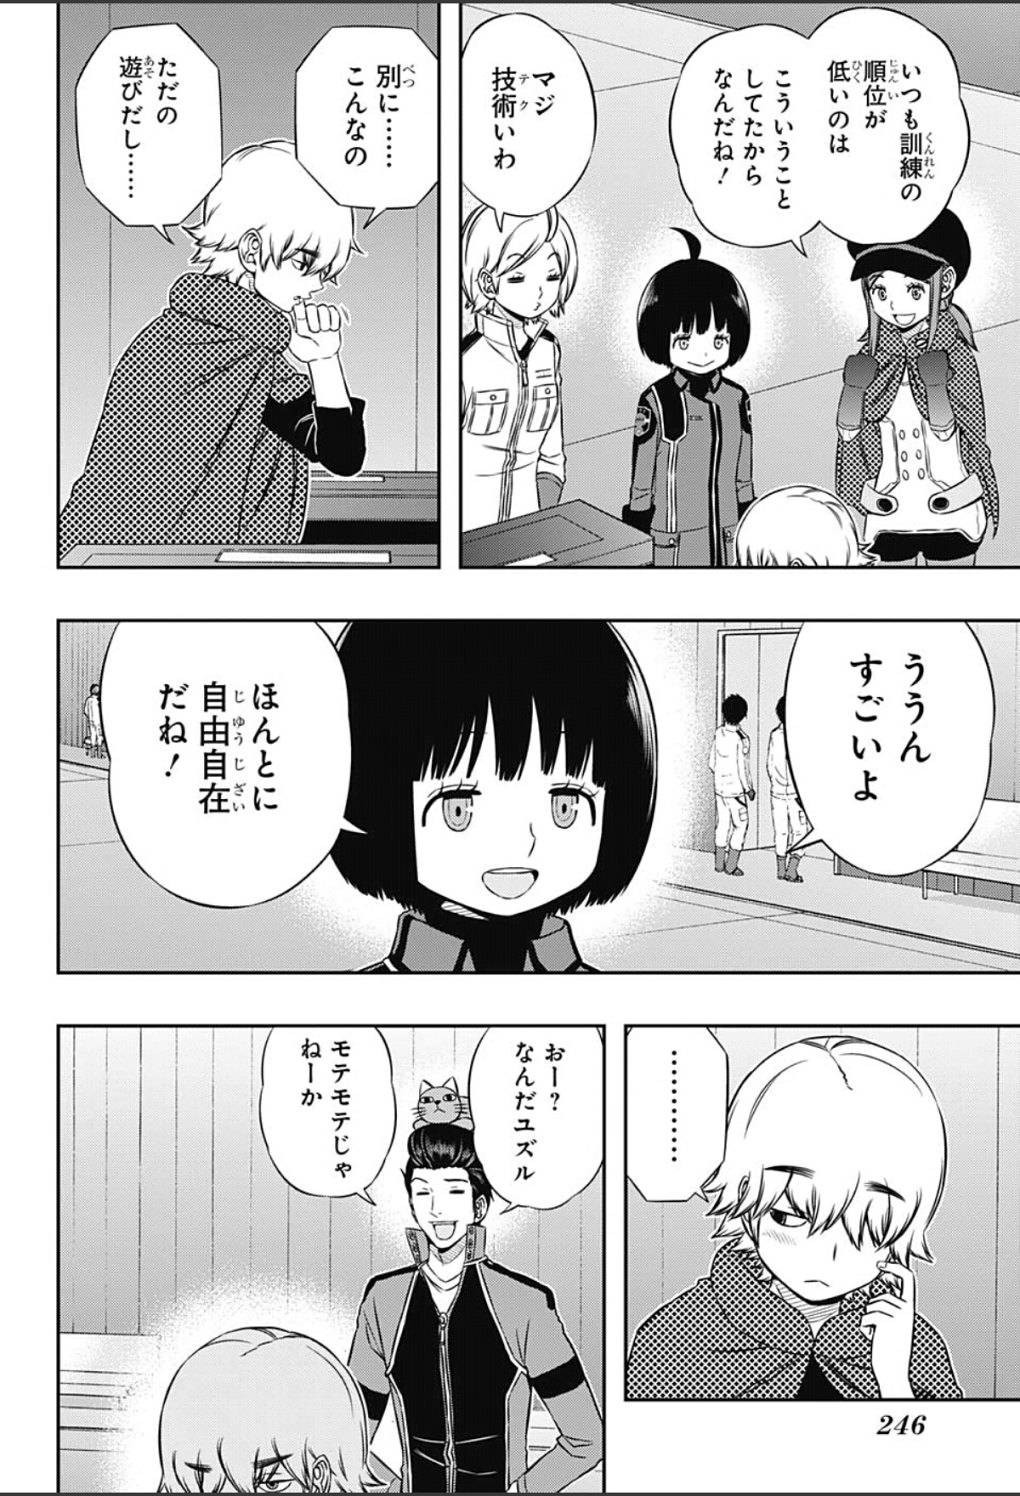 World Trigger - Chapter 108 - Page 3